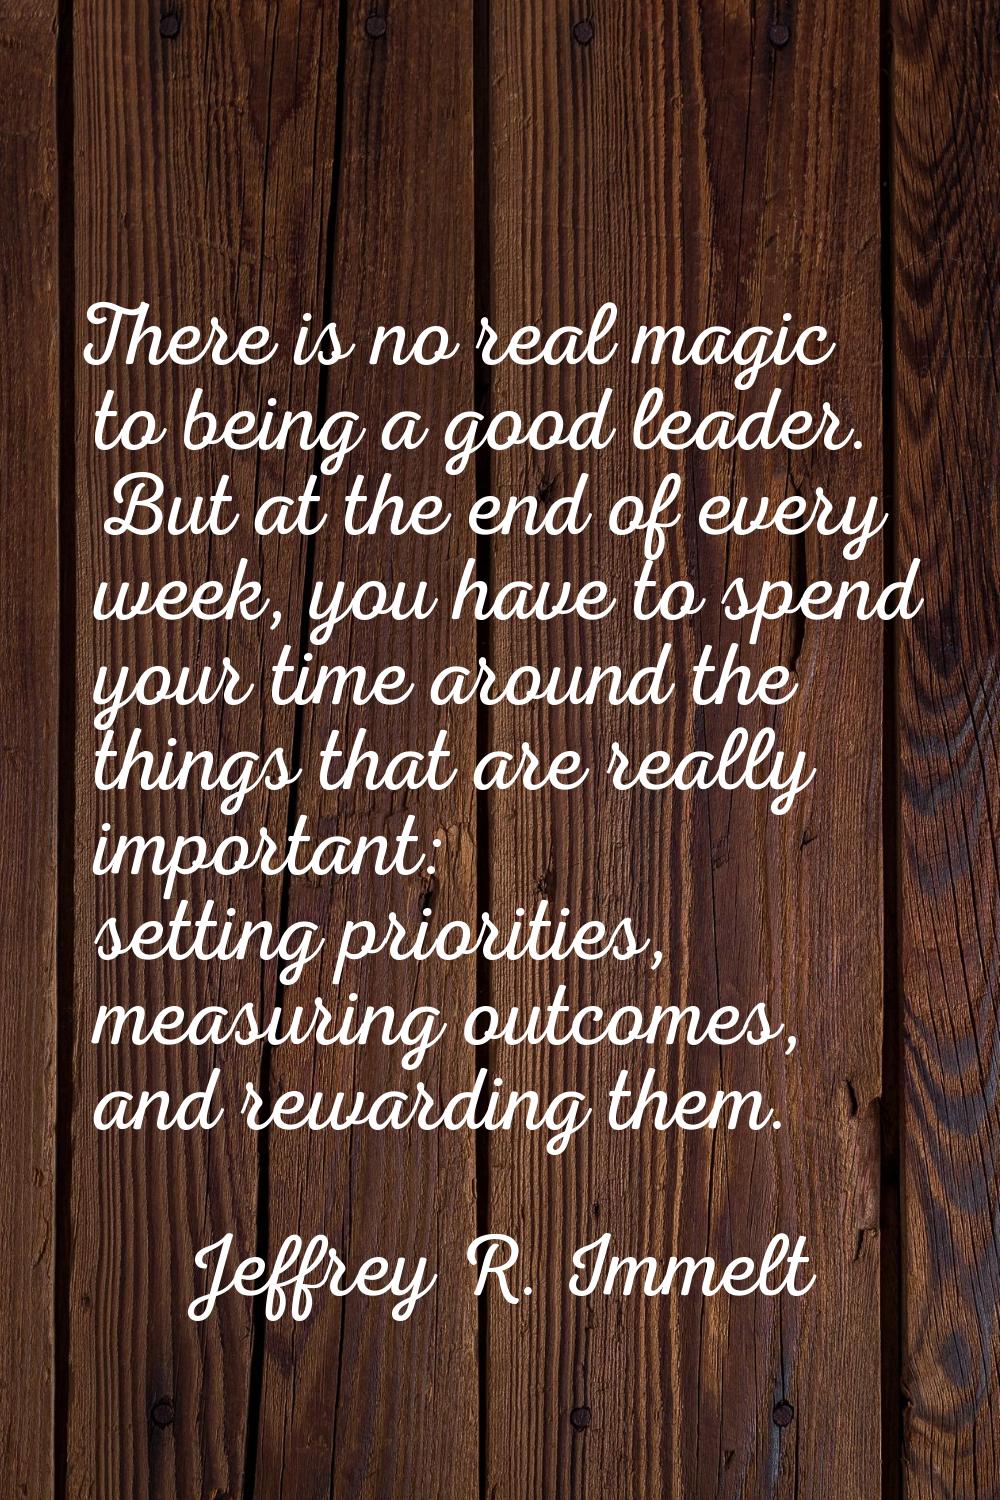 There is no real magic to being a good leader. But at the end of every week, you have to spend your